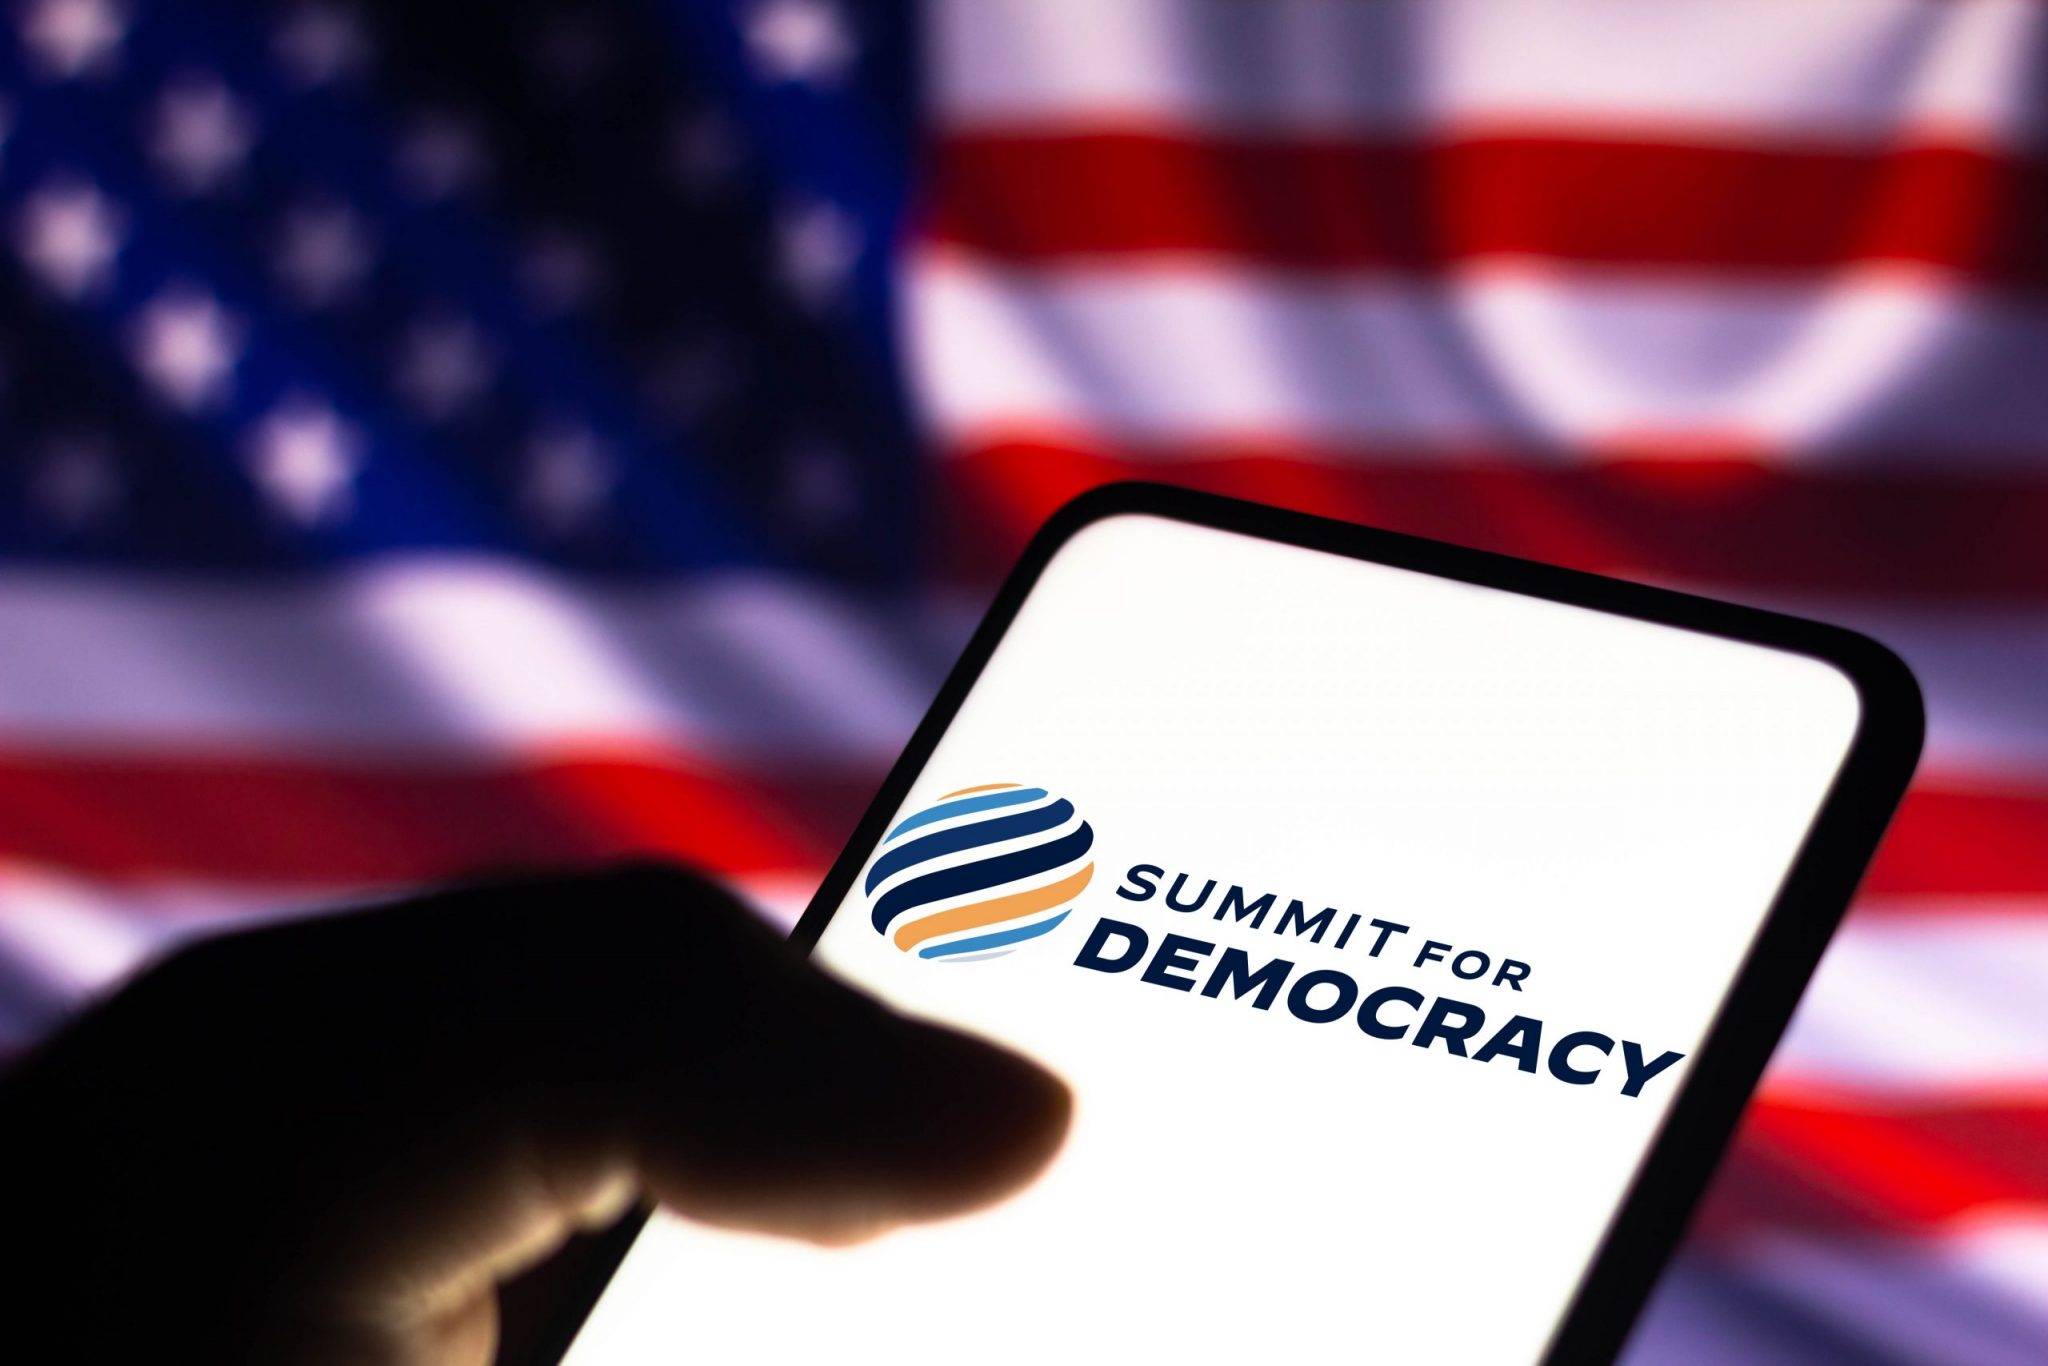 summit for democracy logo in front of american flag